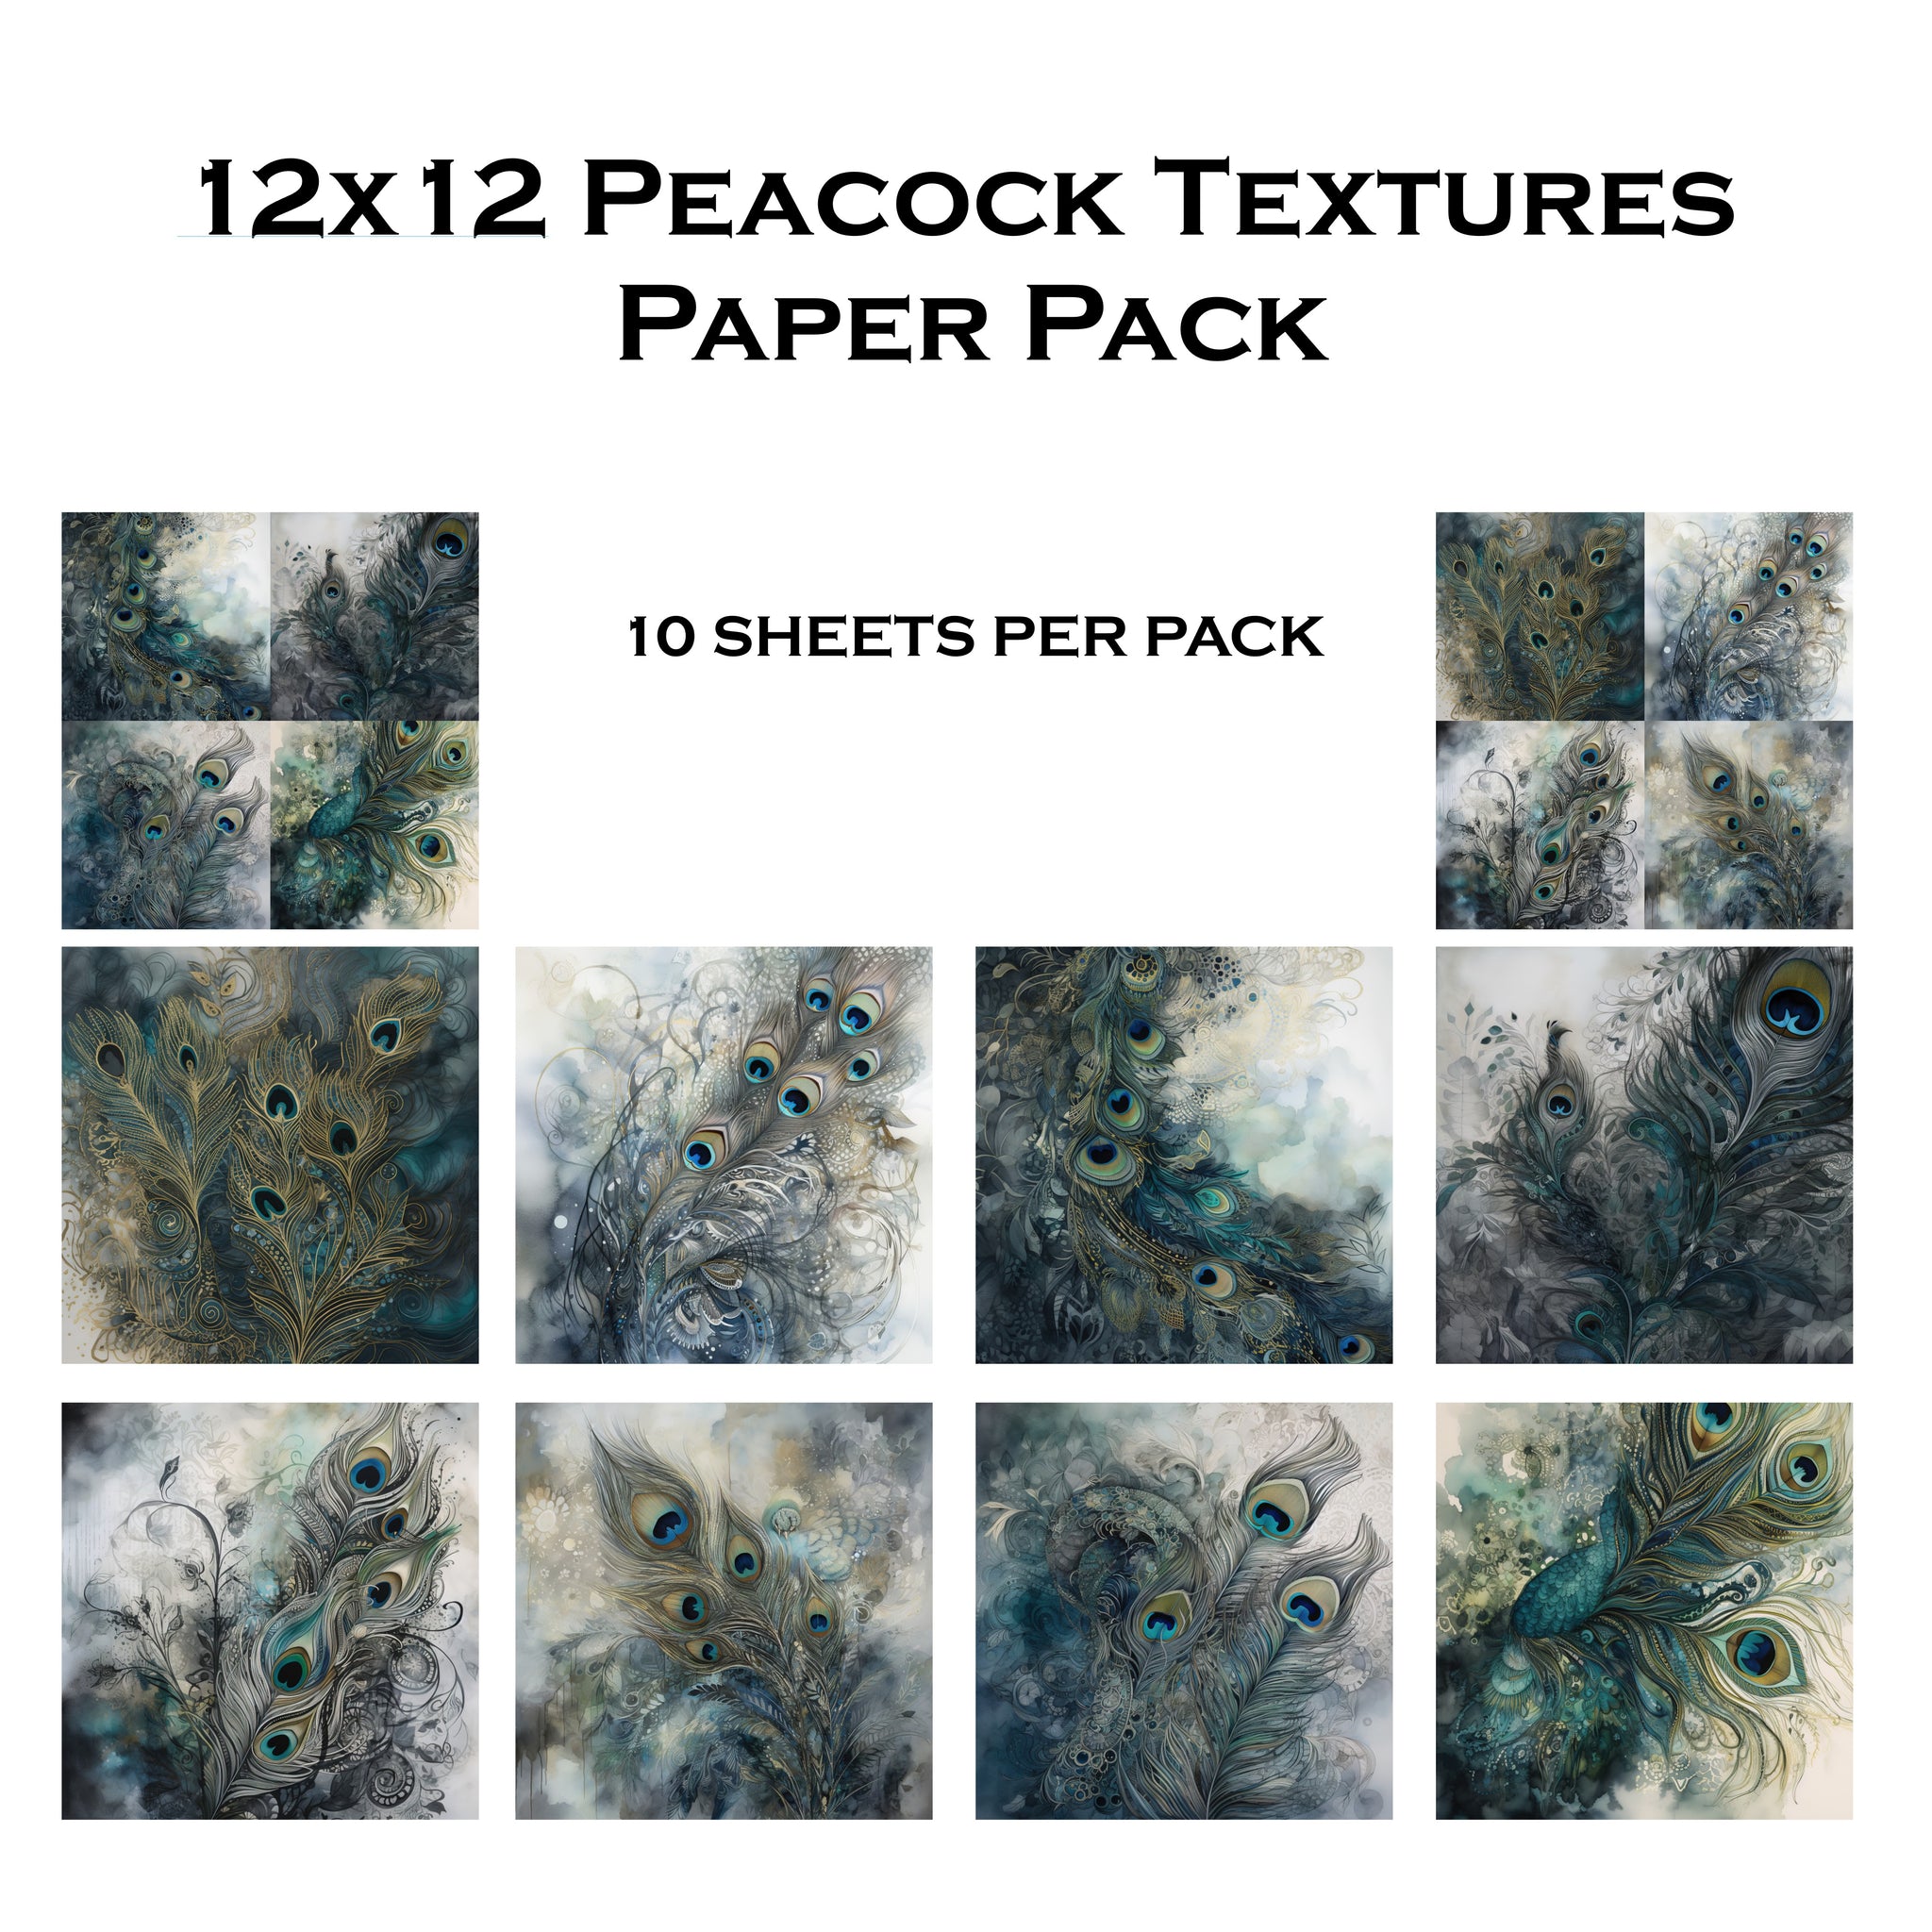 Peacock Textures 12x12 Paper Pack